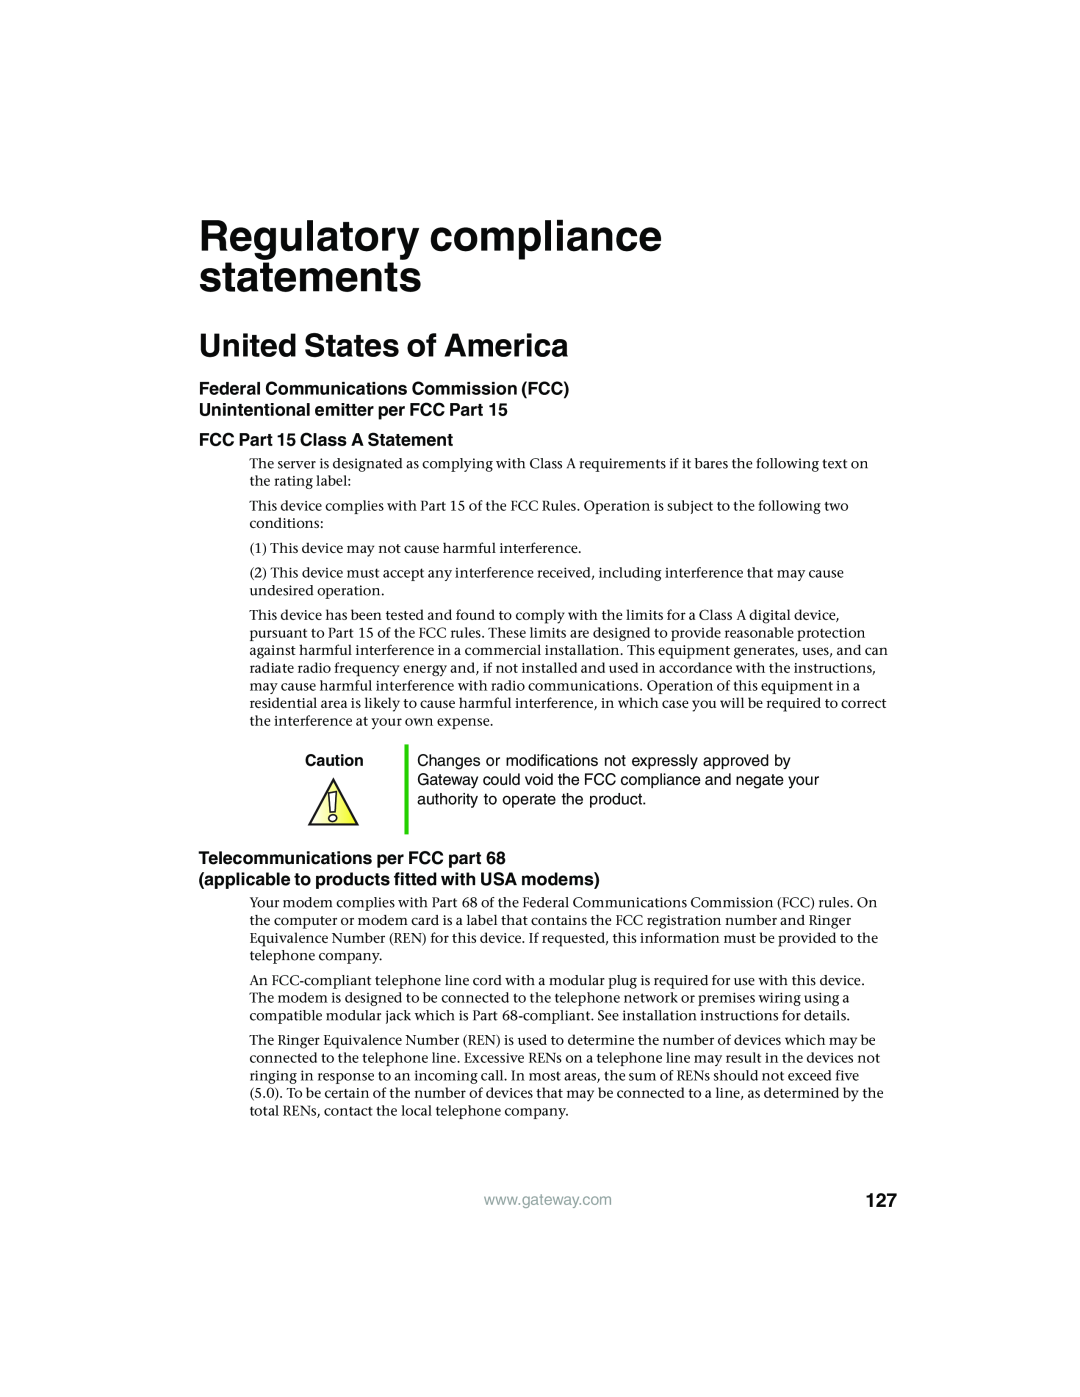 Gateway 955 manual Regulatory compliance statements, United States of America, Federal Communications Commission FCC 